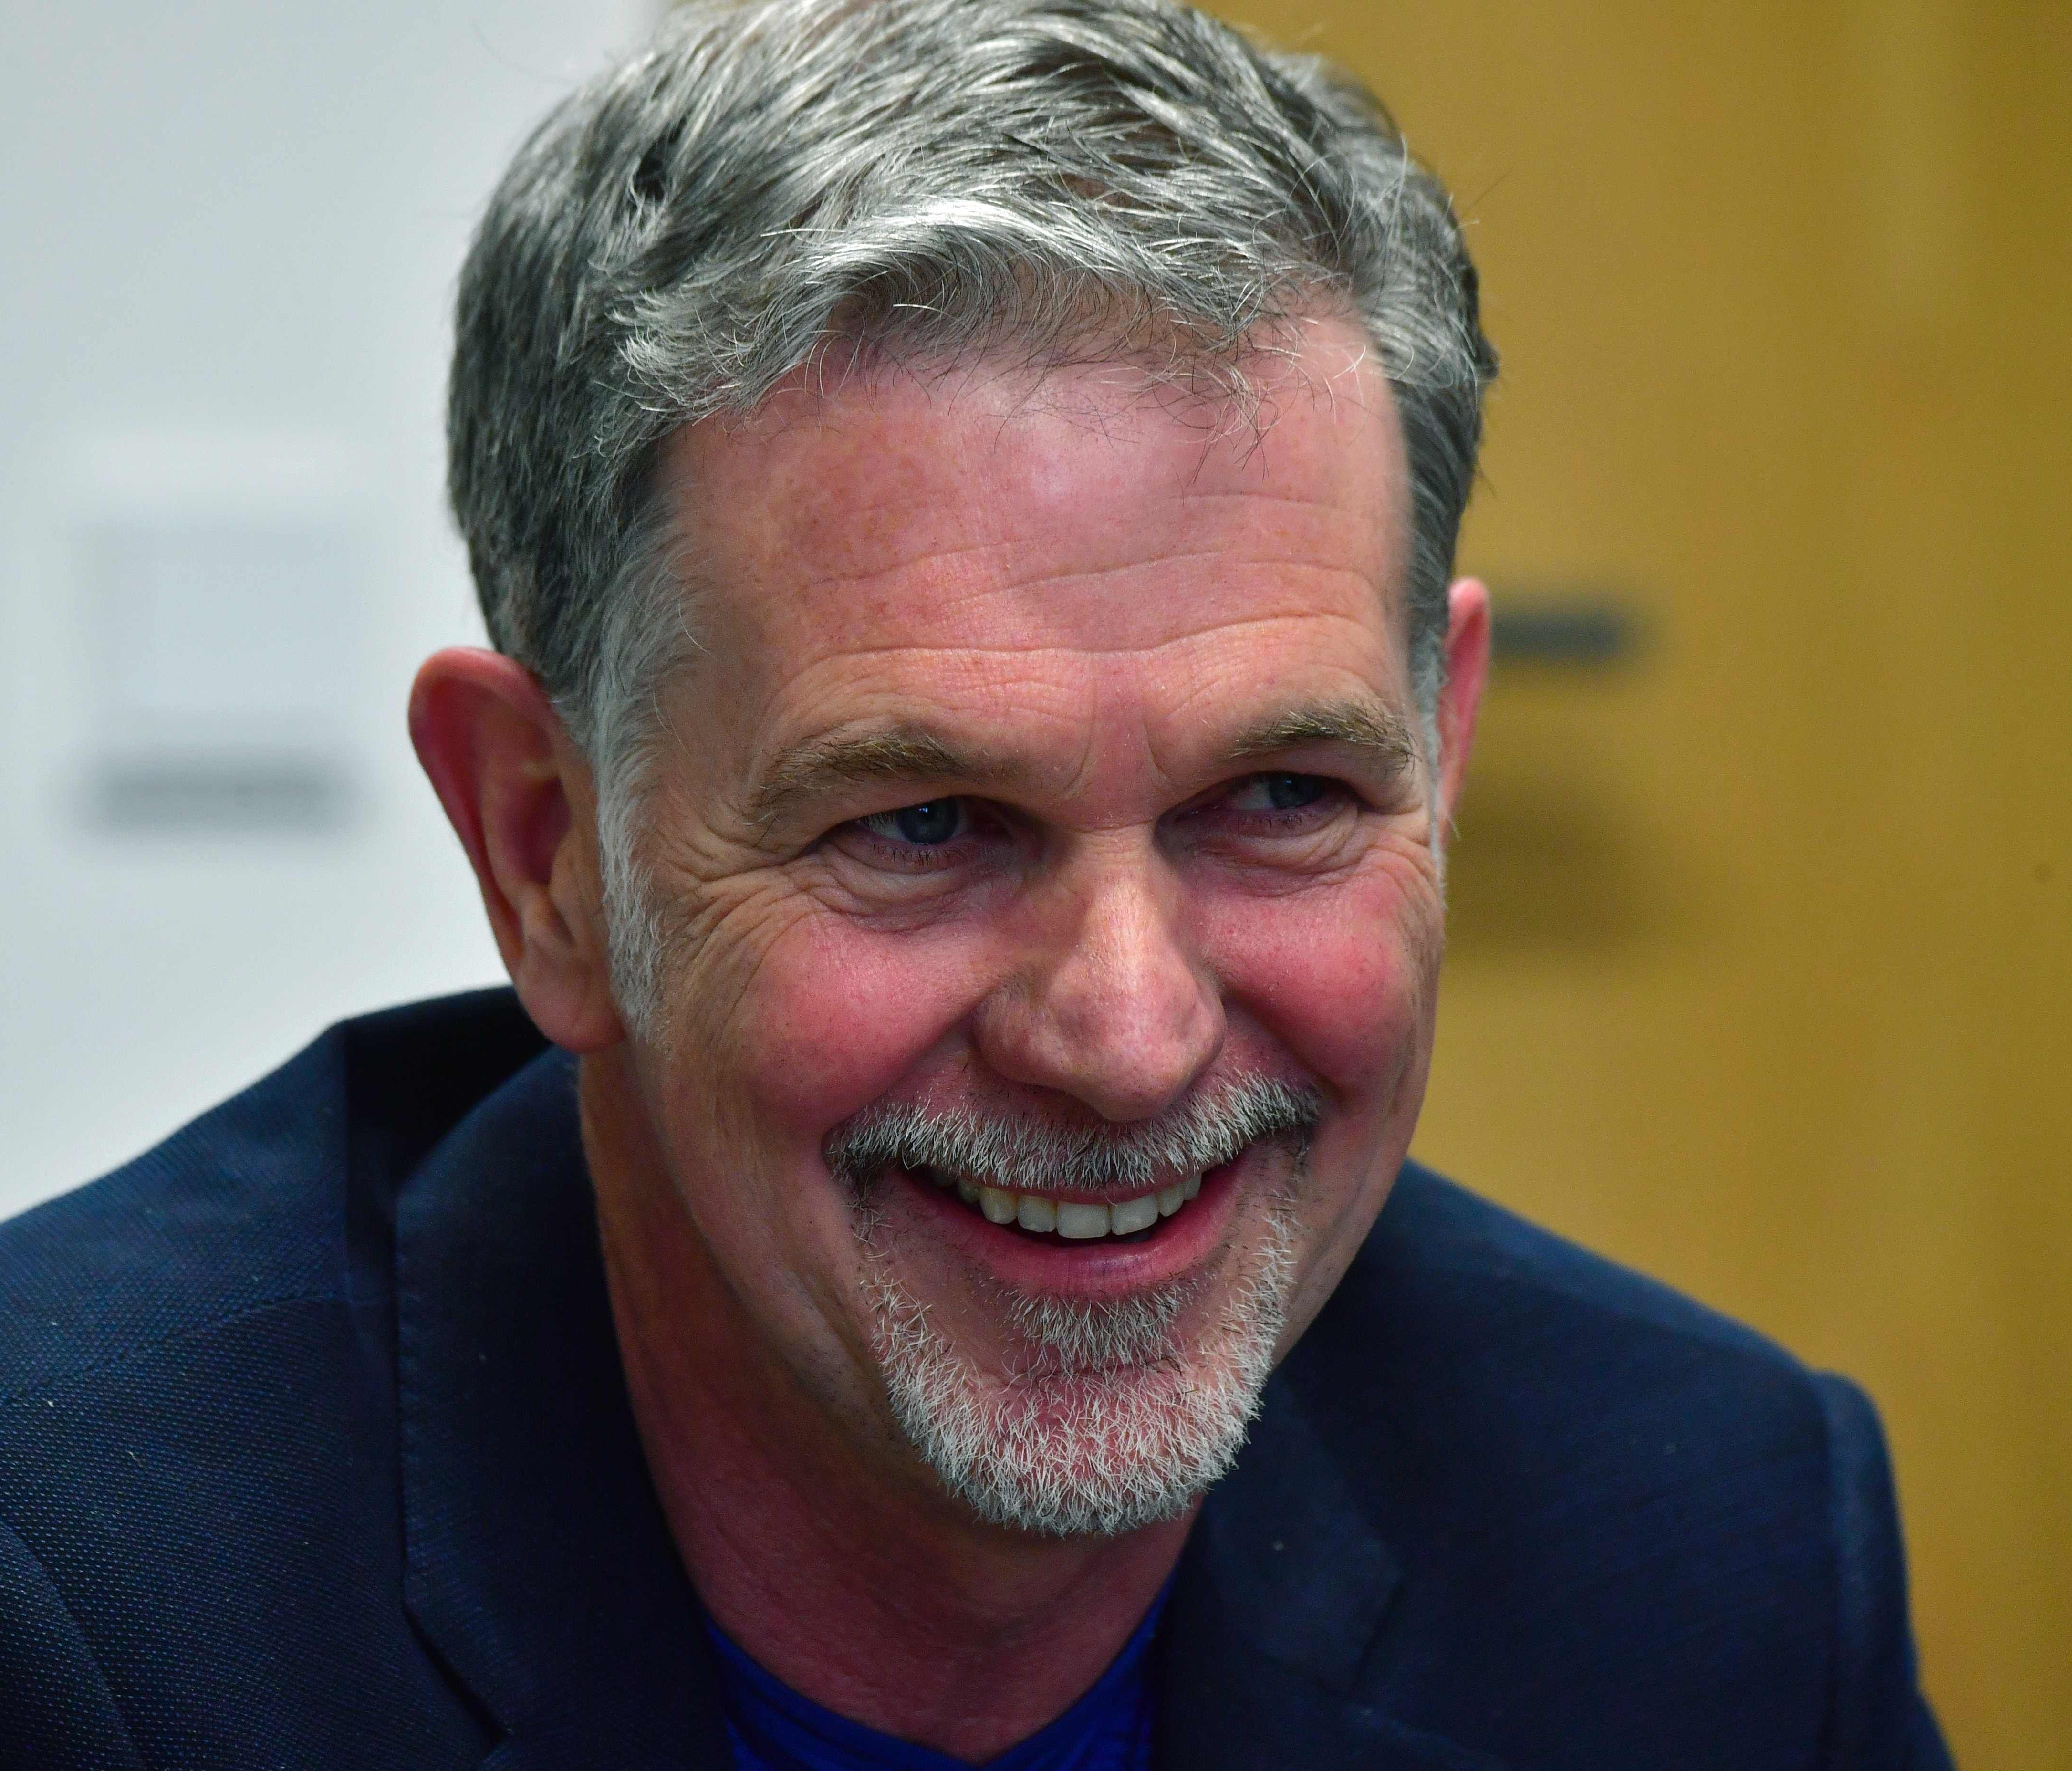 Founder and CEO of Netflix Reed Hastings is pictured during a Netflix event on March 1, 2017 in Berlin.